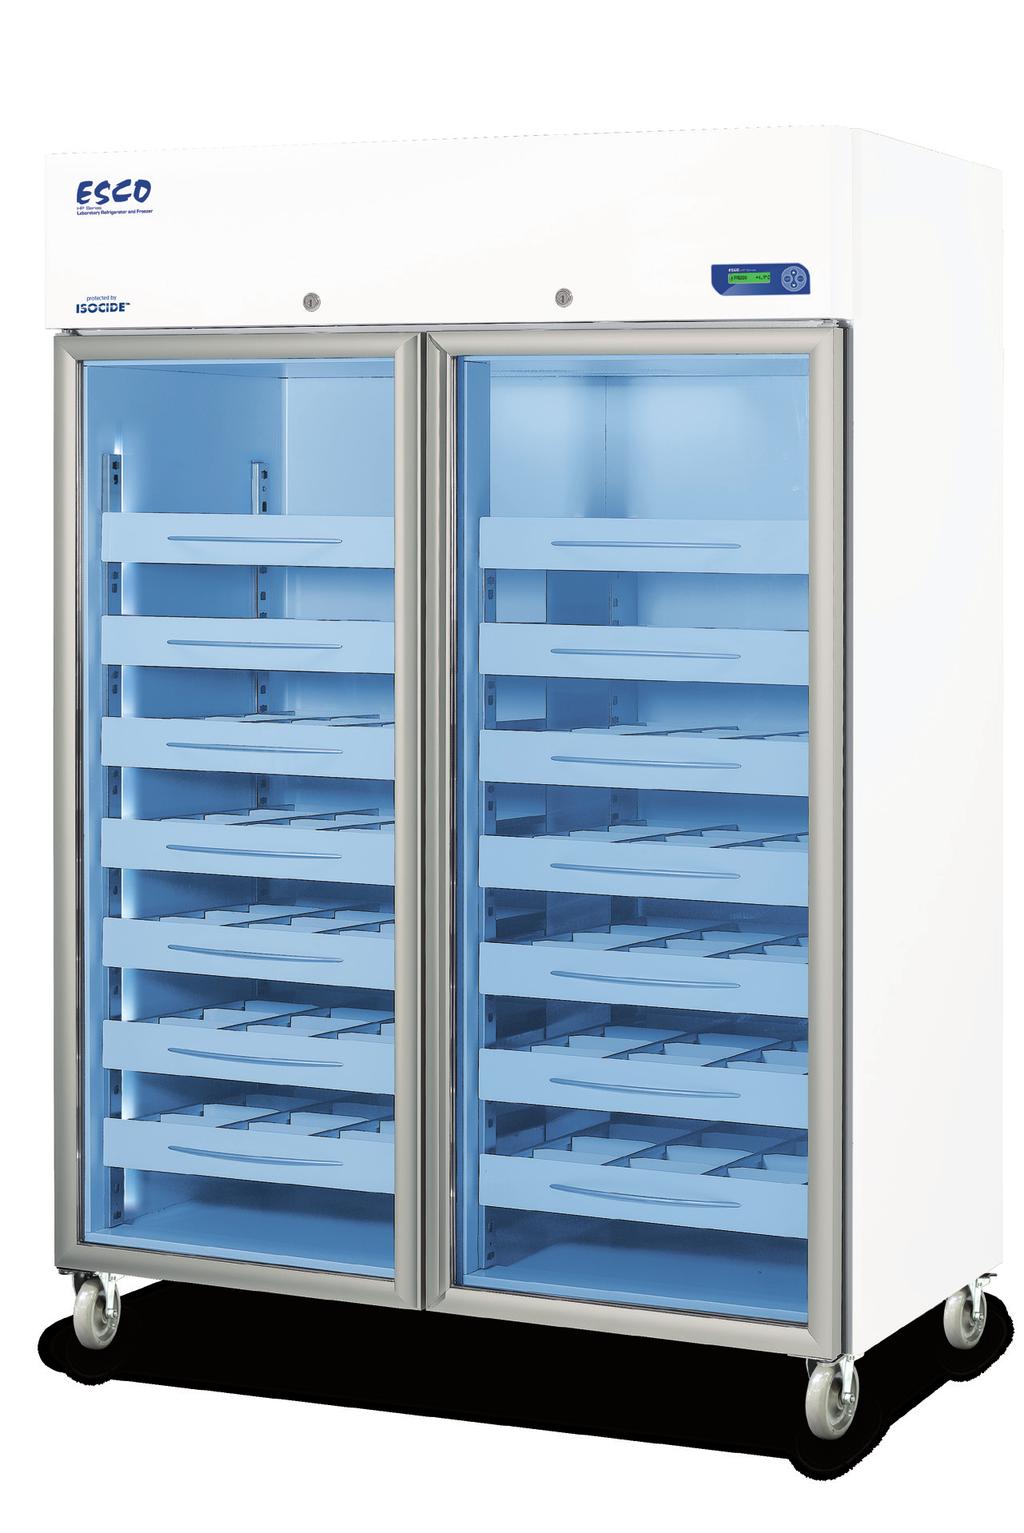 10 Laboratory Refrigerator Model: HR1-1500S Internal Lighting Save up to 70% power with less heat exposure to precious samples.